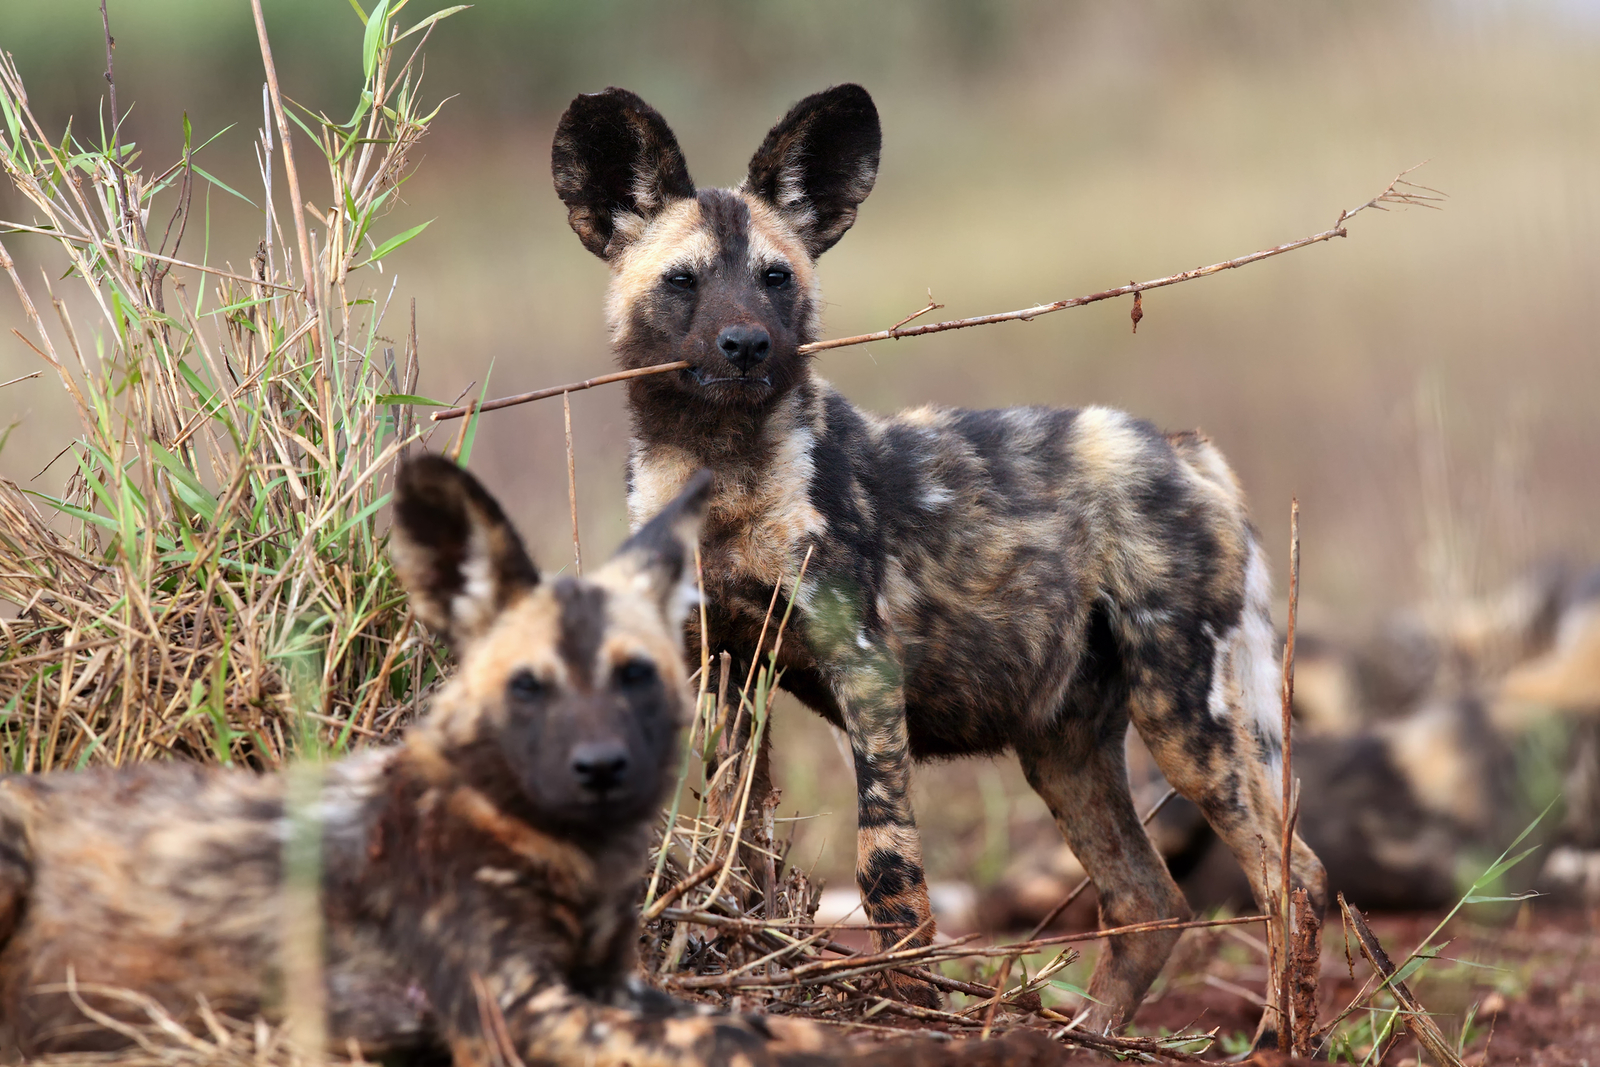 An African wild dog puppy with a piece of reed in his mouth. Image Credit: © Klomsky | Dreamstime.com.